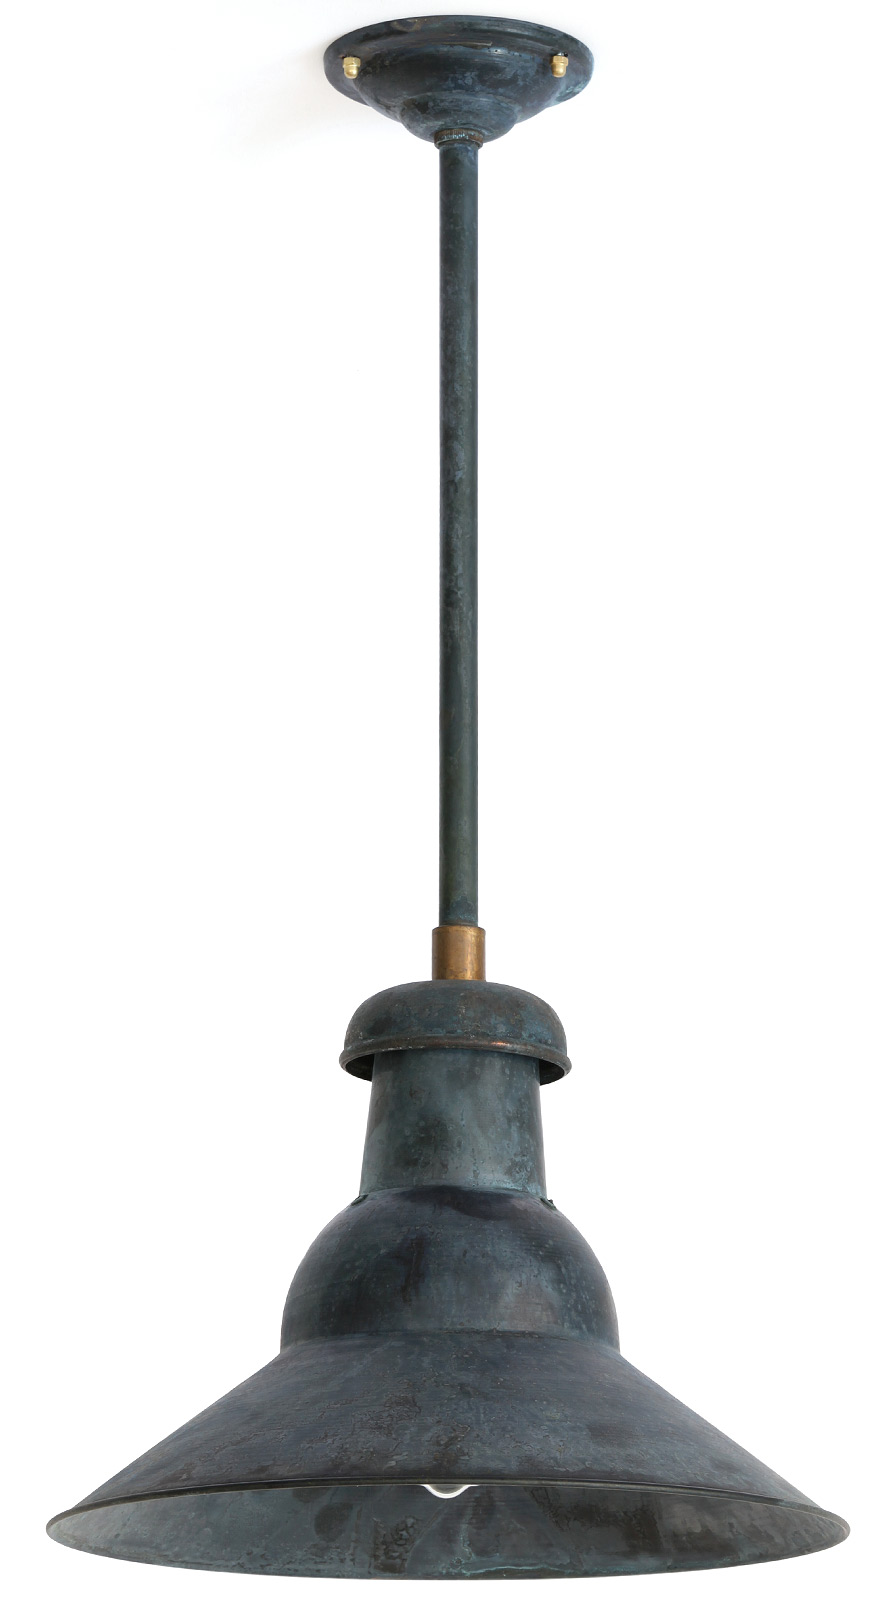 Frühes 20. Jahrhundert: Industriestil-Stab-Pendelleuchte: Authentic 20th century industrial style pendant lamp by Bolich (overall height 60 cm)